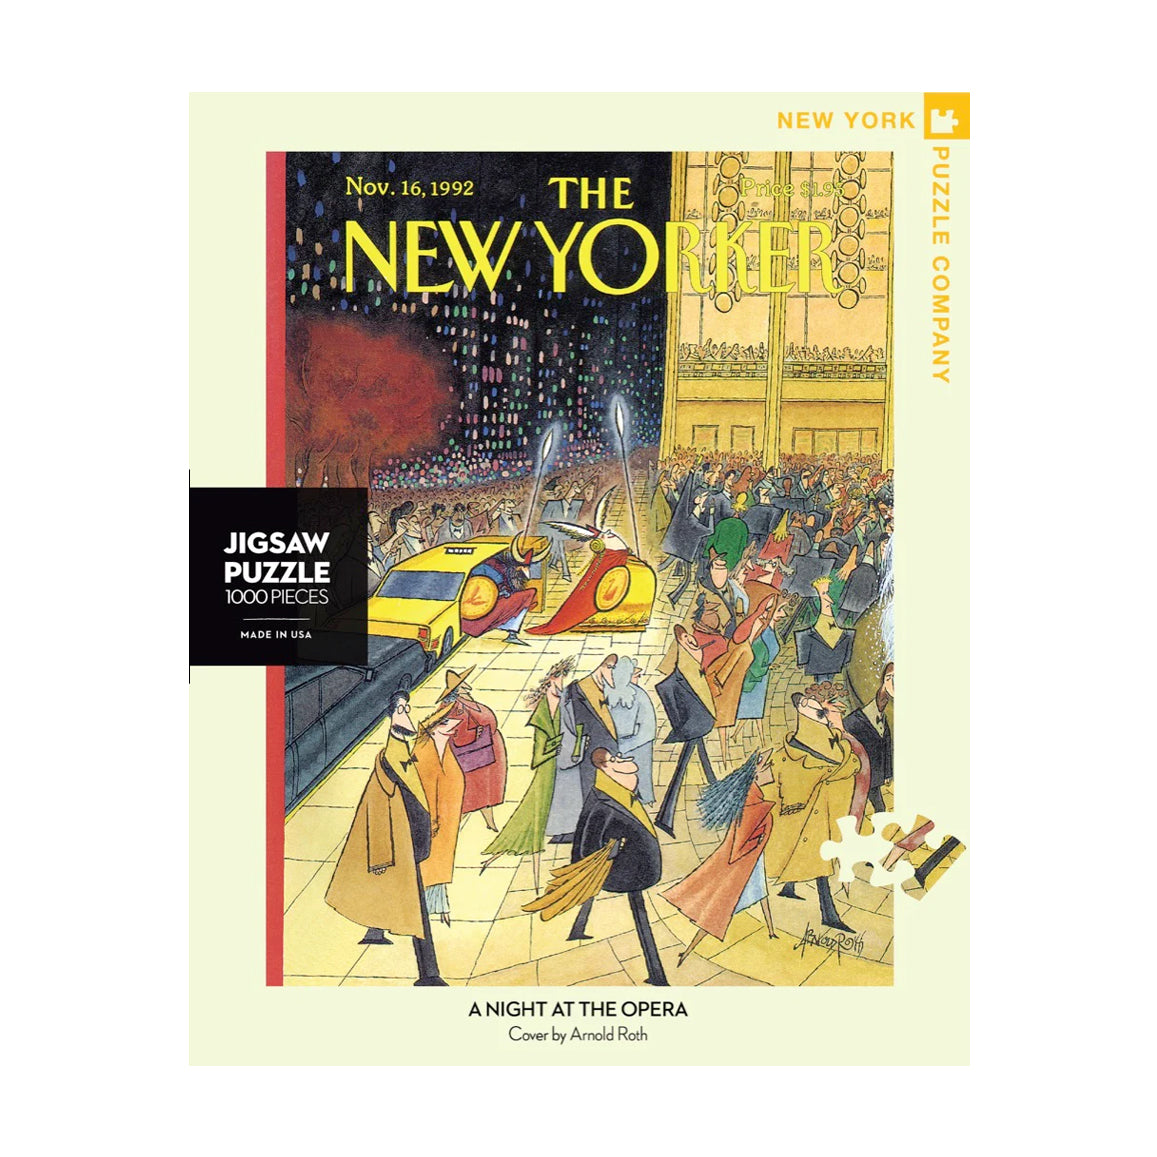 Puzzel The New Yorker│A Night at the opera 1000 stuks│New York Puzzle Company│art. NPZNY1956│voorkant verpakking